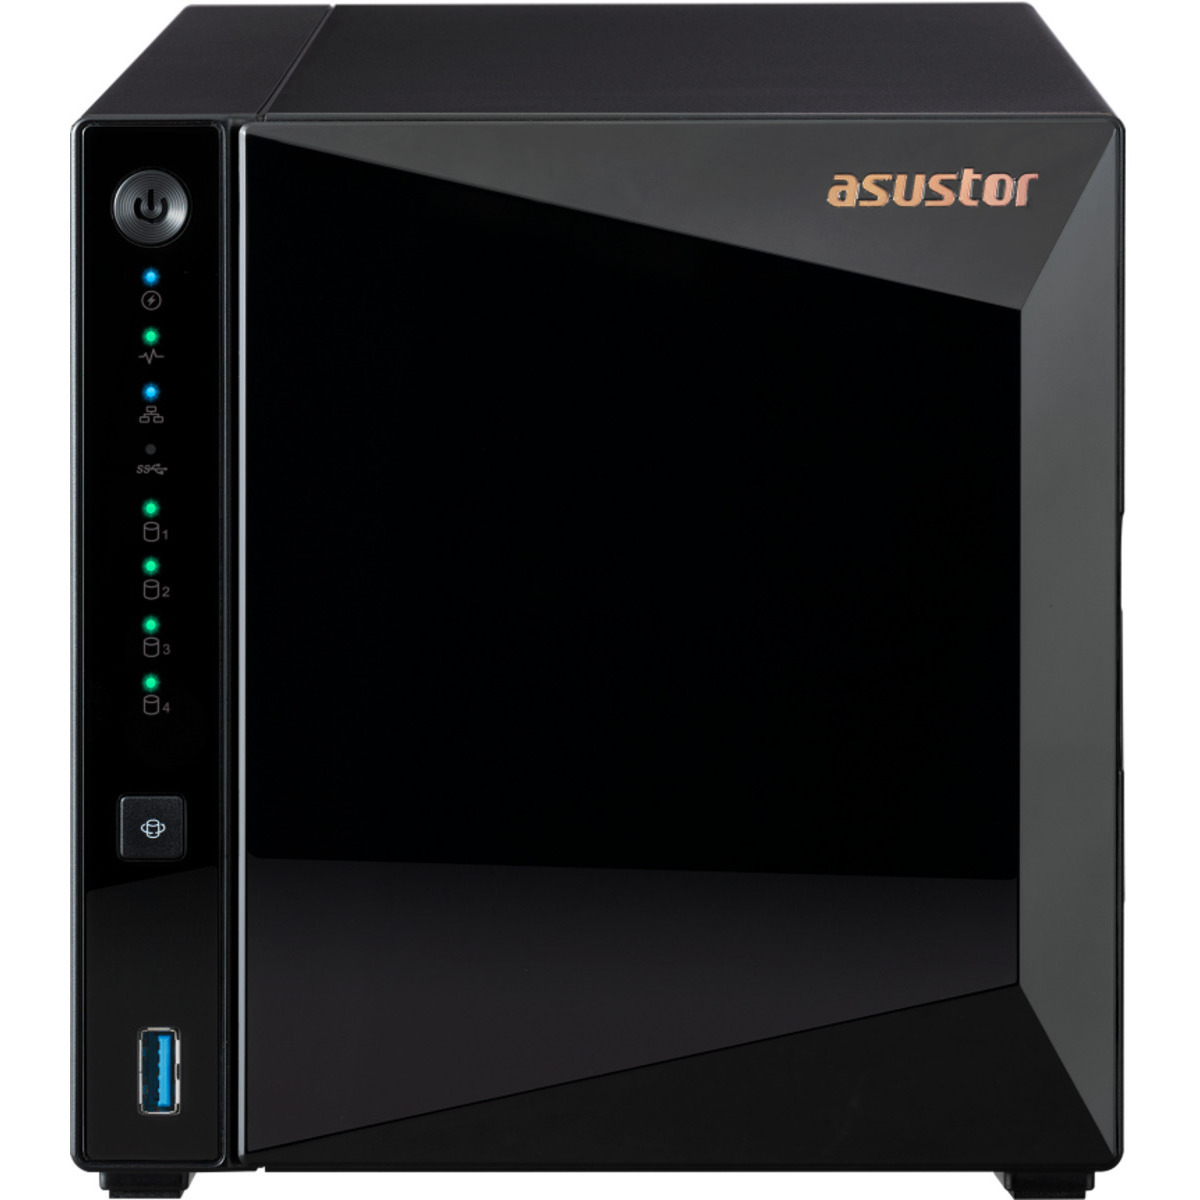 ASUSTOR DRIVESTOR 4 Pro Gen2 AS3304T v2 96tb 4-Bay Desktop Personal / Basic Home / Small Office NAS - Network Attached Storage Device 4x24tb Seagate EXOS X24 ST24000NM002H 3.5 7200rpm SATA 6Gb/s HDD ENTERPRISE Class Drives Installed - Burn-In Tested - ON SALE DRIVESTOR 4 Pro Gen2 AS3304T v2